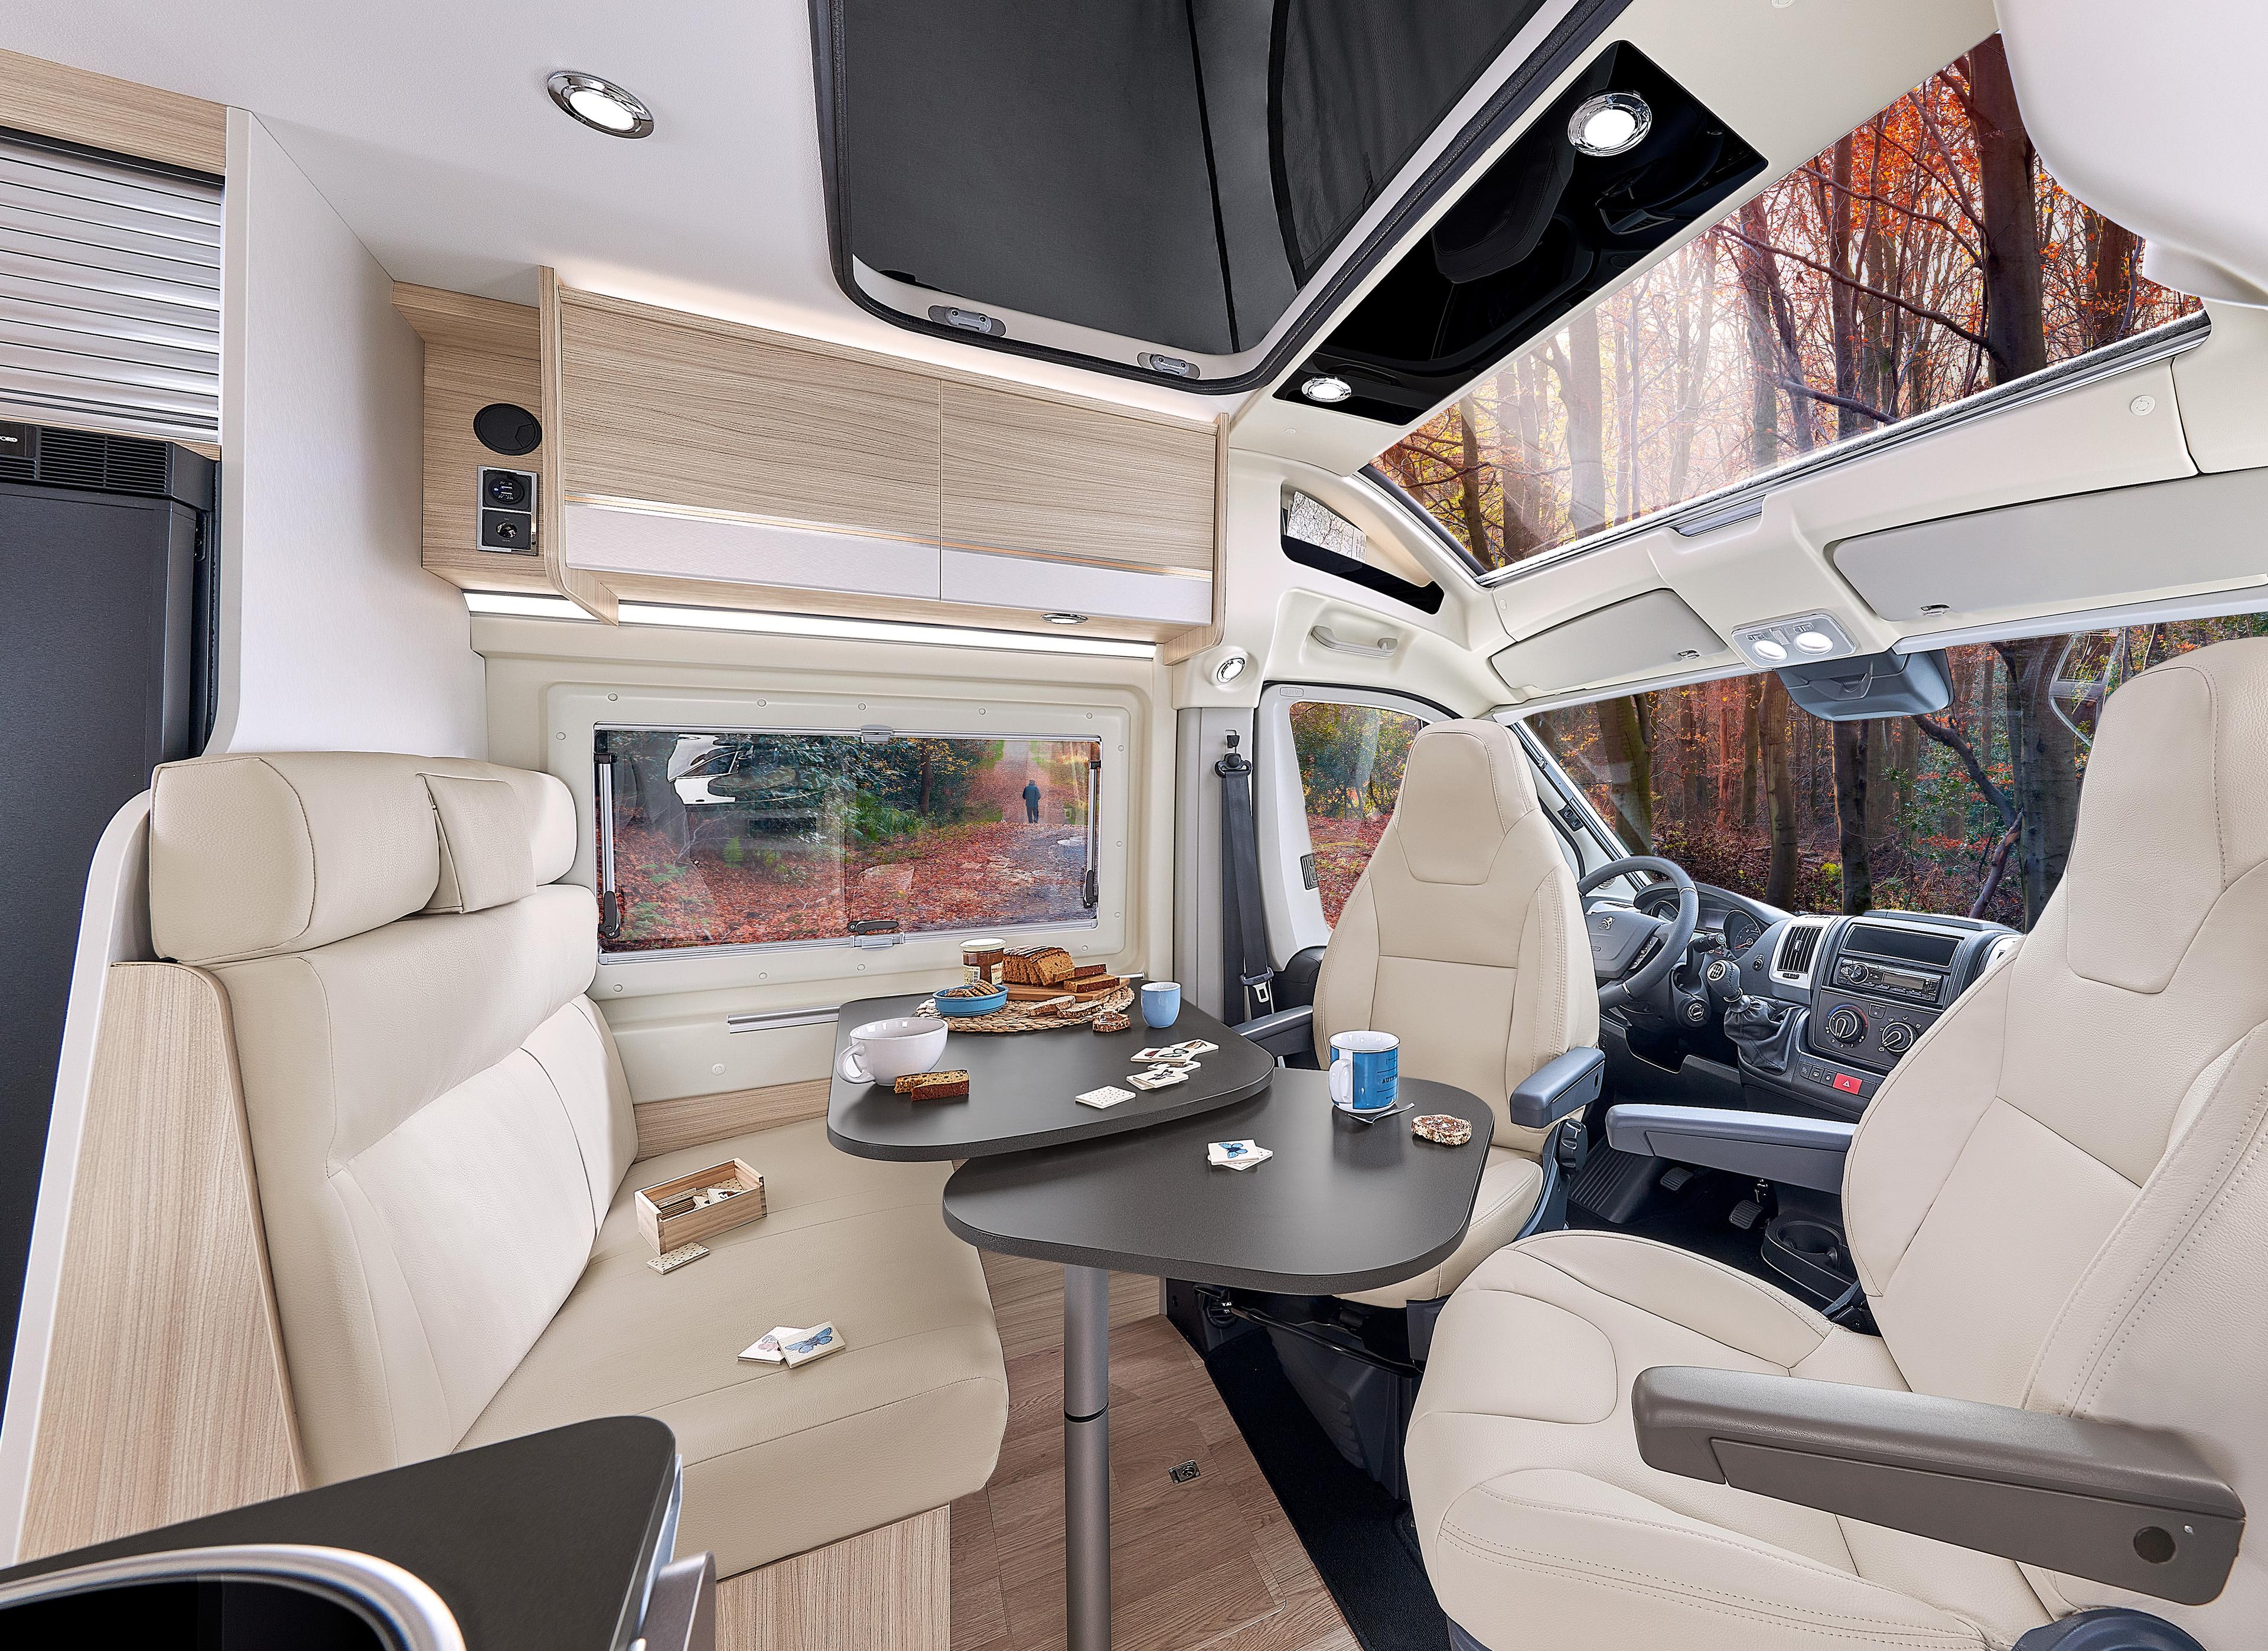 Dreamer D55UP - a well-thought-out campervan for four – image 3